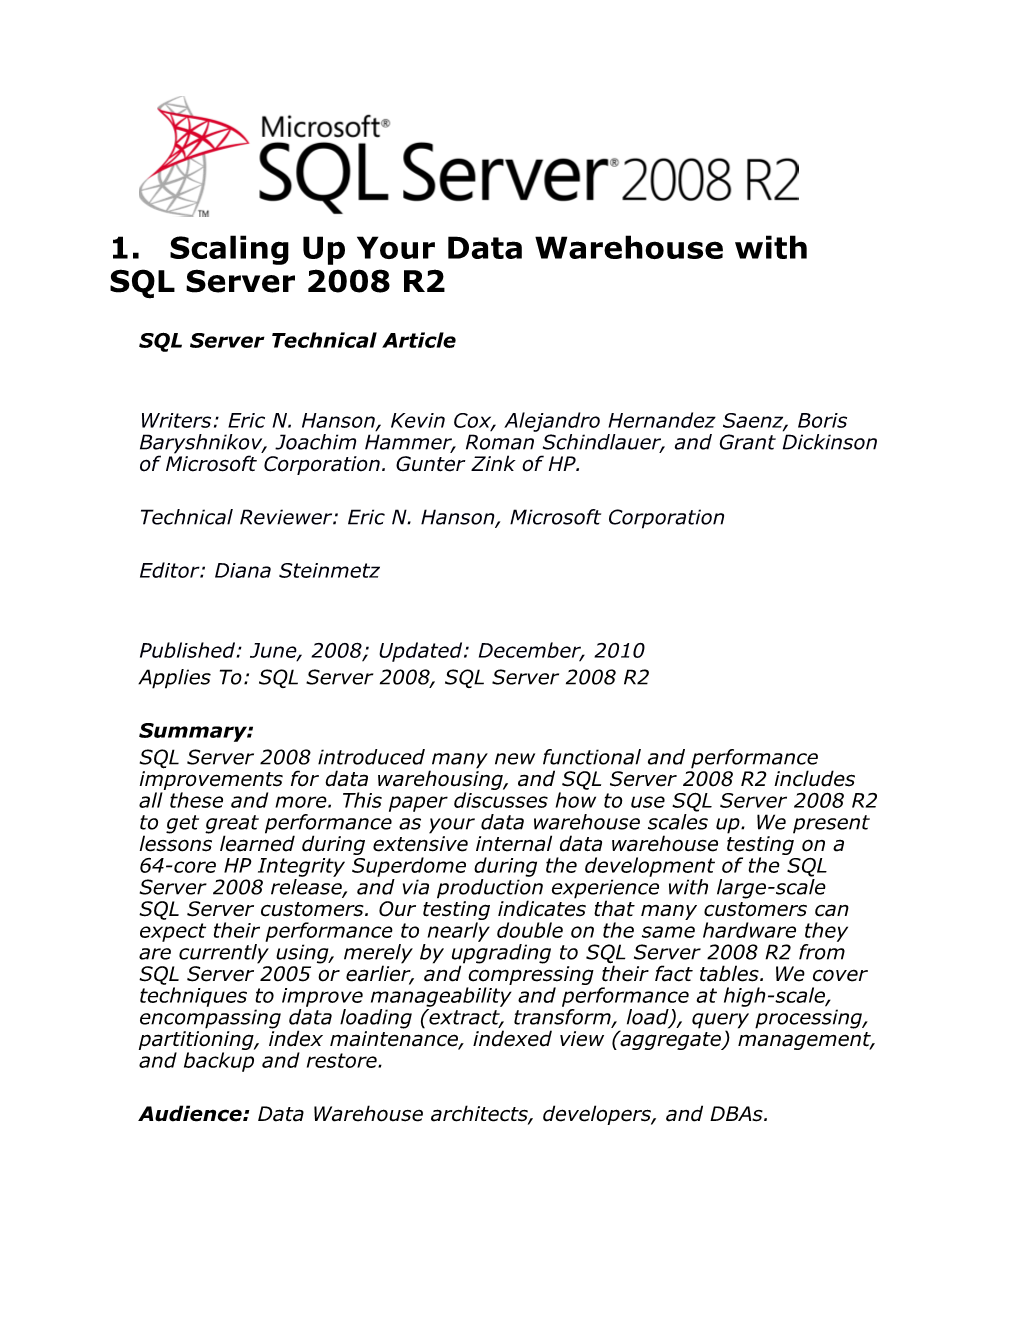 Scaling up Your Data Warehouse with SQL Server 2008